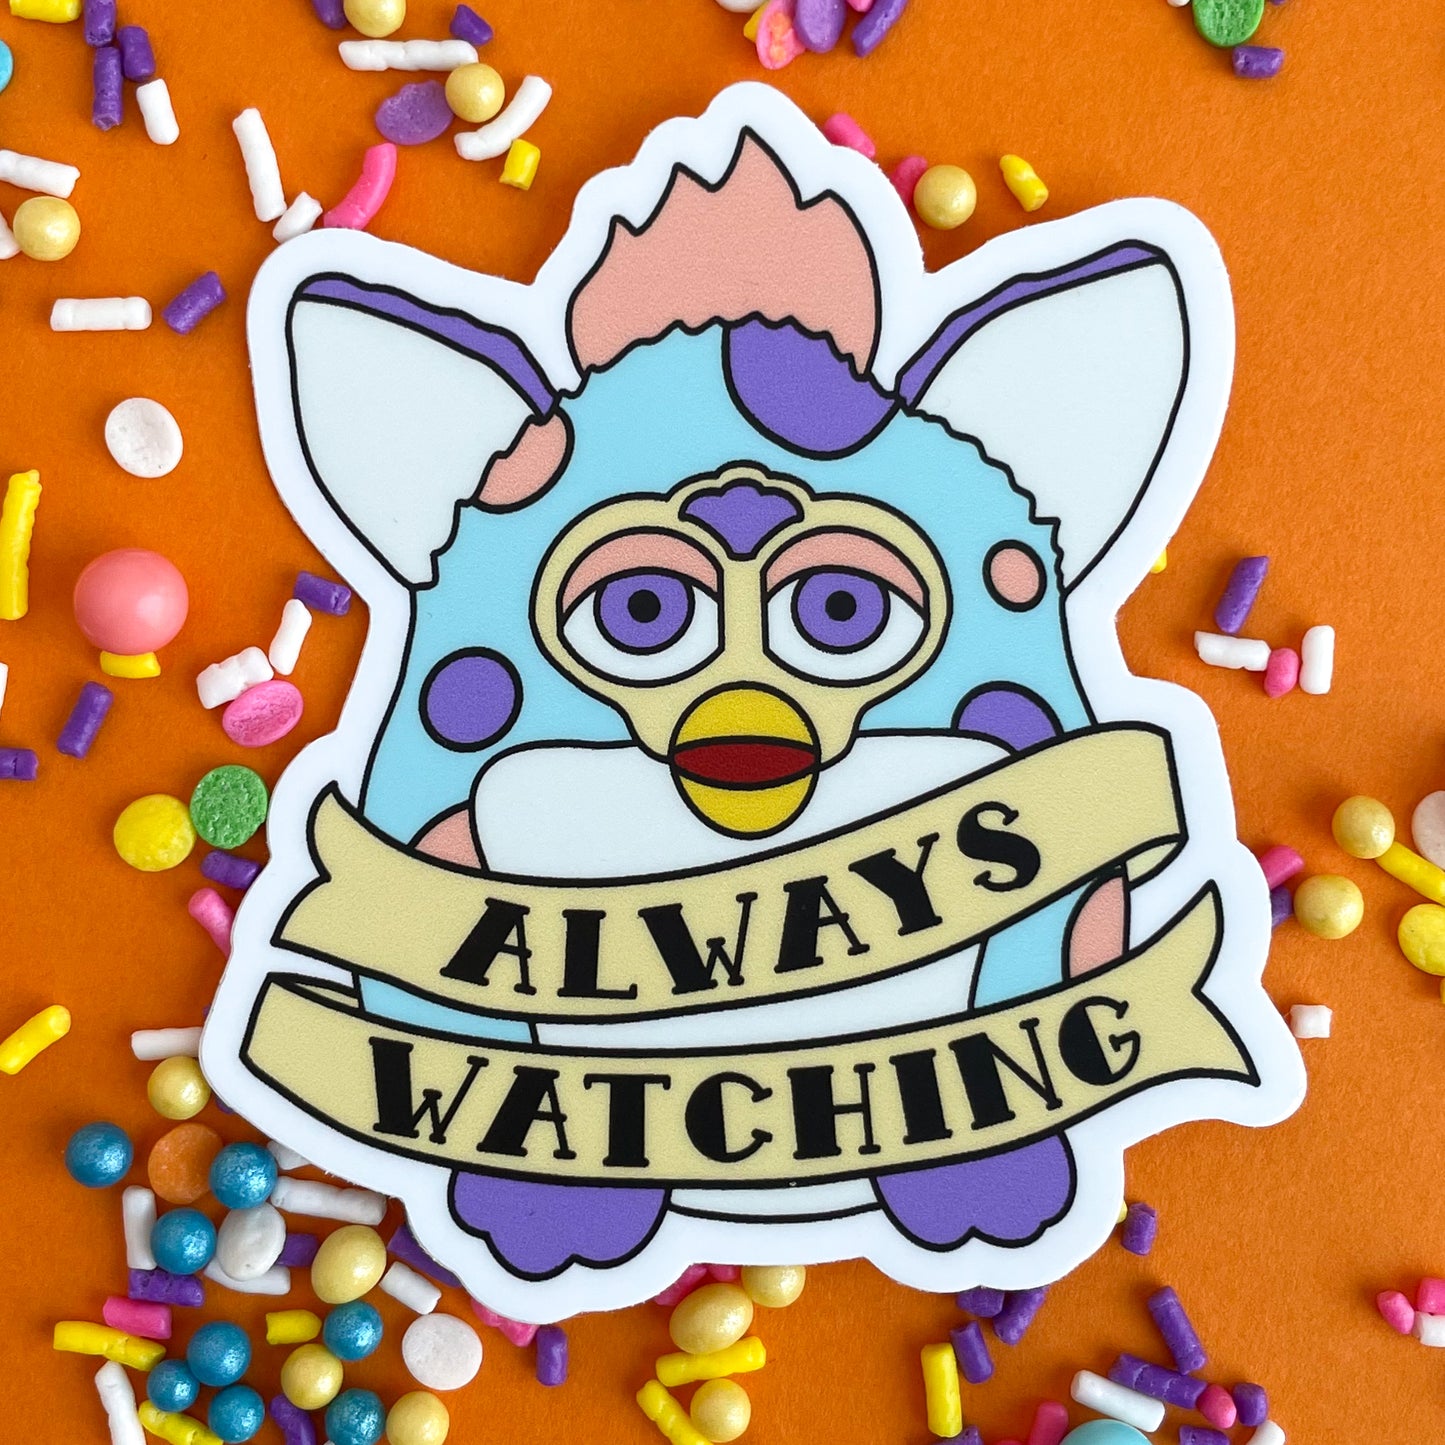 A sticker of a furby that is pastel blue with peach and purple spots. There is a tattoo style banner around him that says. "Always Watching". The sticker is on an orange background that is covered in pastel sprinkles.